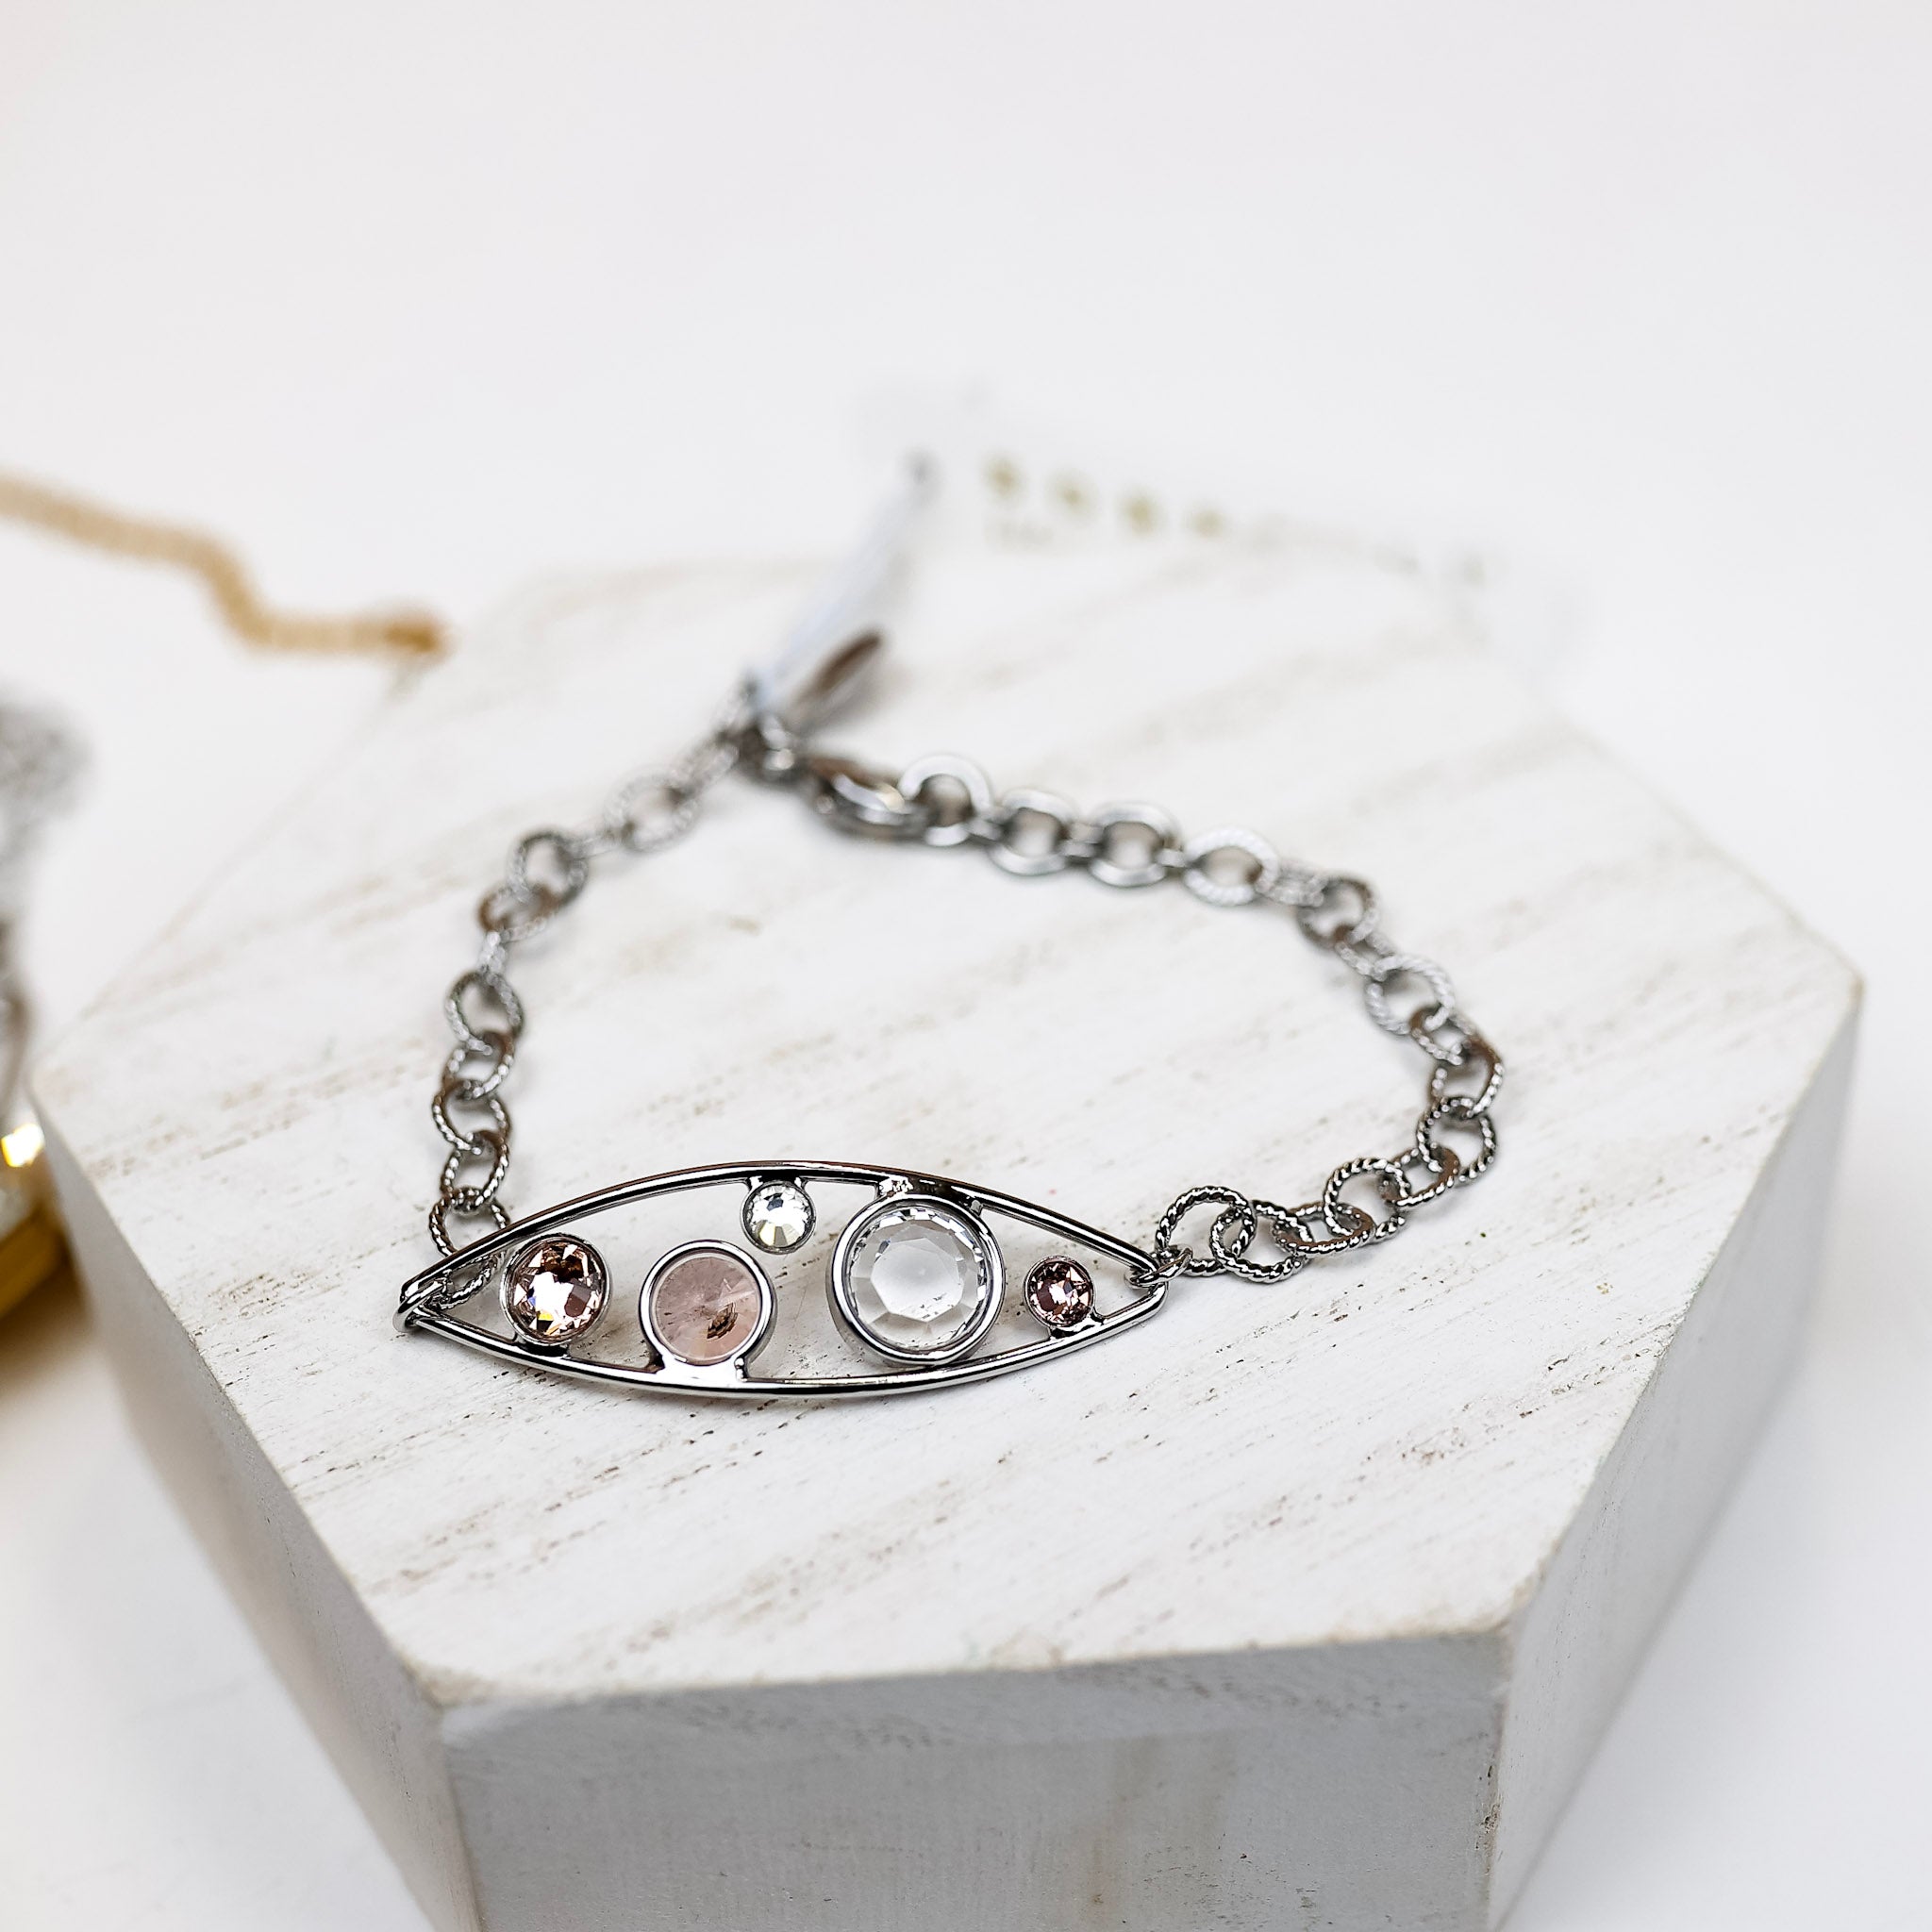 A silver-tone tennis bracelet with an oval outline pendant with crystals inside.